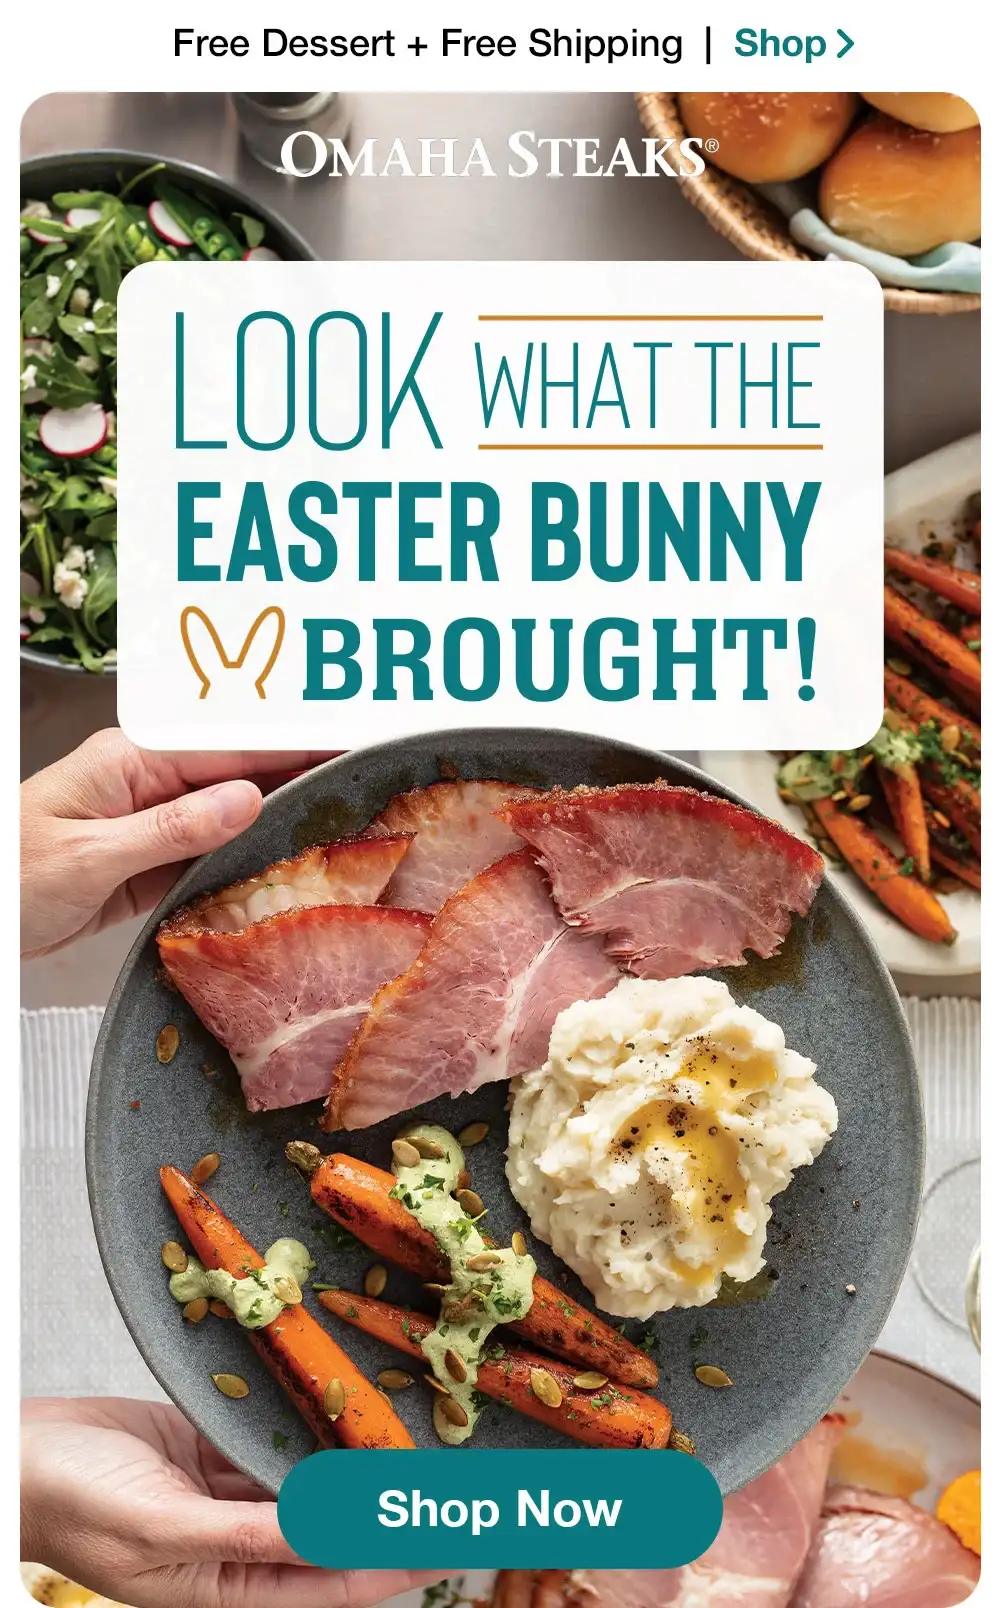 Free Dessert + Free Shipping | Shop |OMAHA STEAKS| LOOK WHAT THE EASTER BUNNY BROUGHT! | Shop Now